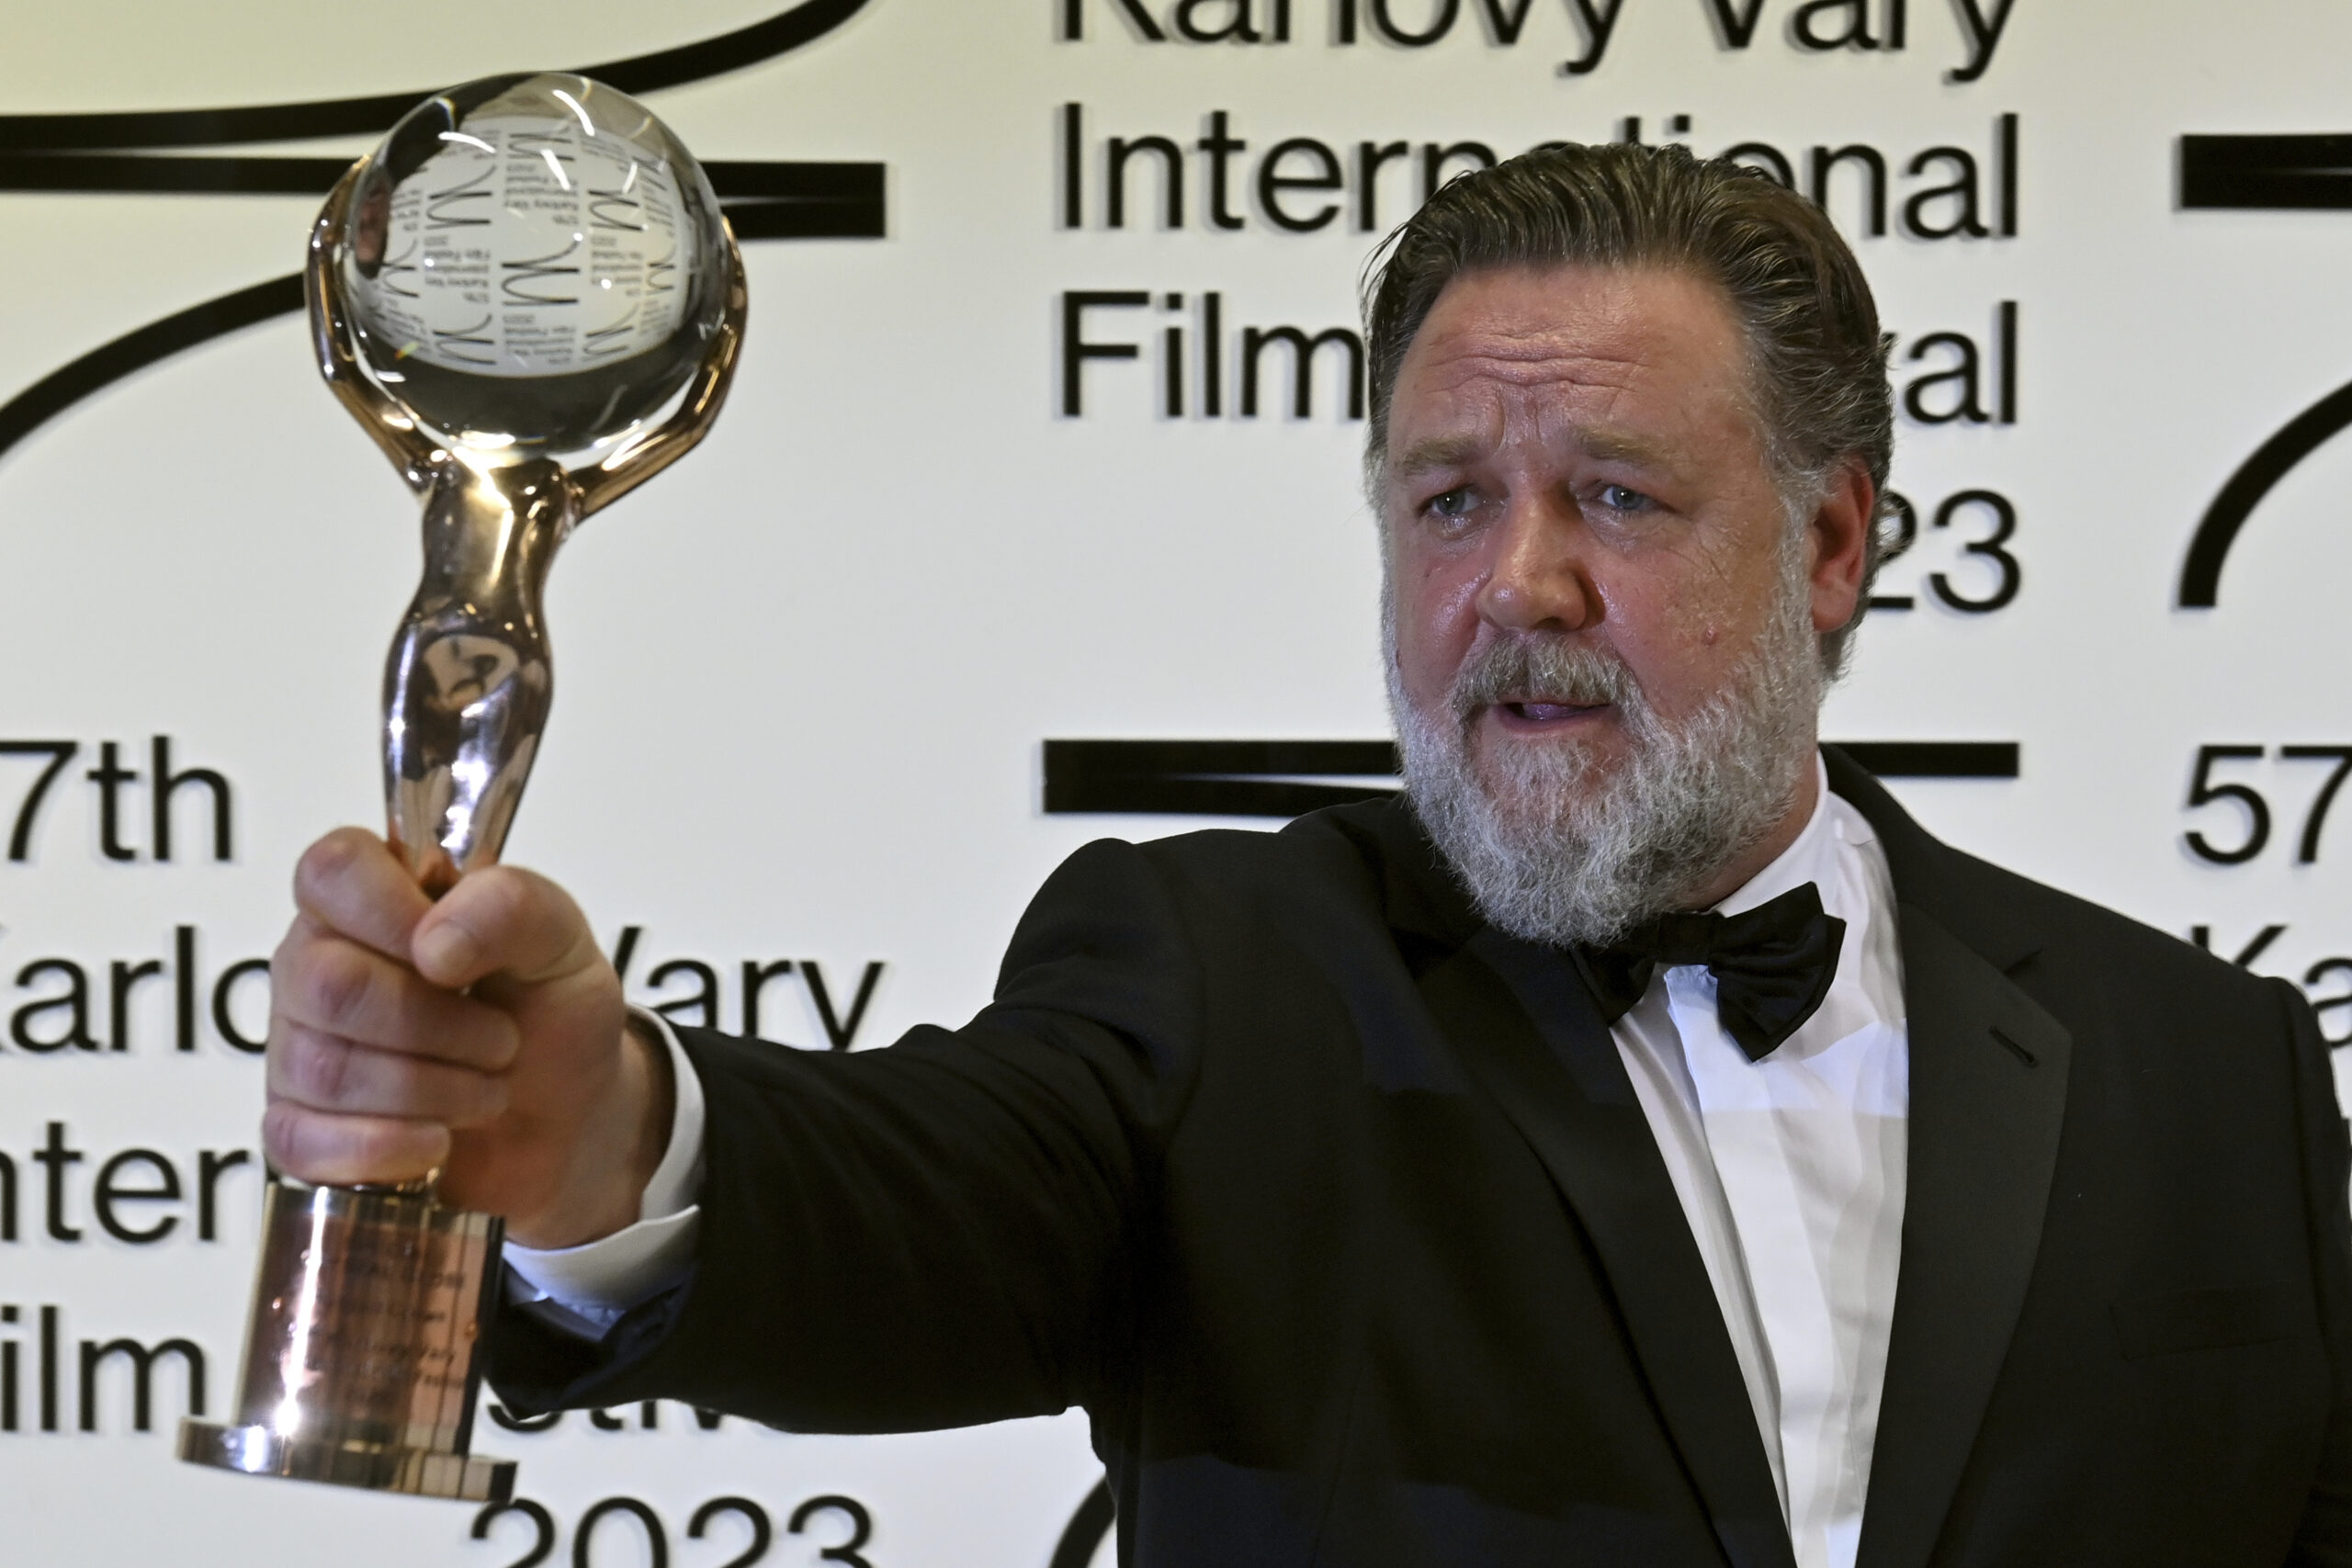 Actor Russell Crowe poses with Crystal Globe award for contribution to world cinema after the opening ceremony of the 57th Karlovy Vary International Film Festival (KVIFF), on June 30, 2023, at the Thermal Hotel in Karlovy Vary, Czech Republic. Photo/Slavomir Kubes (CTK via AP Images)